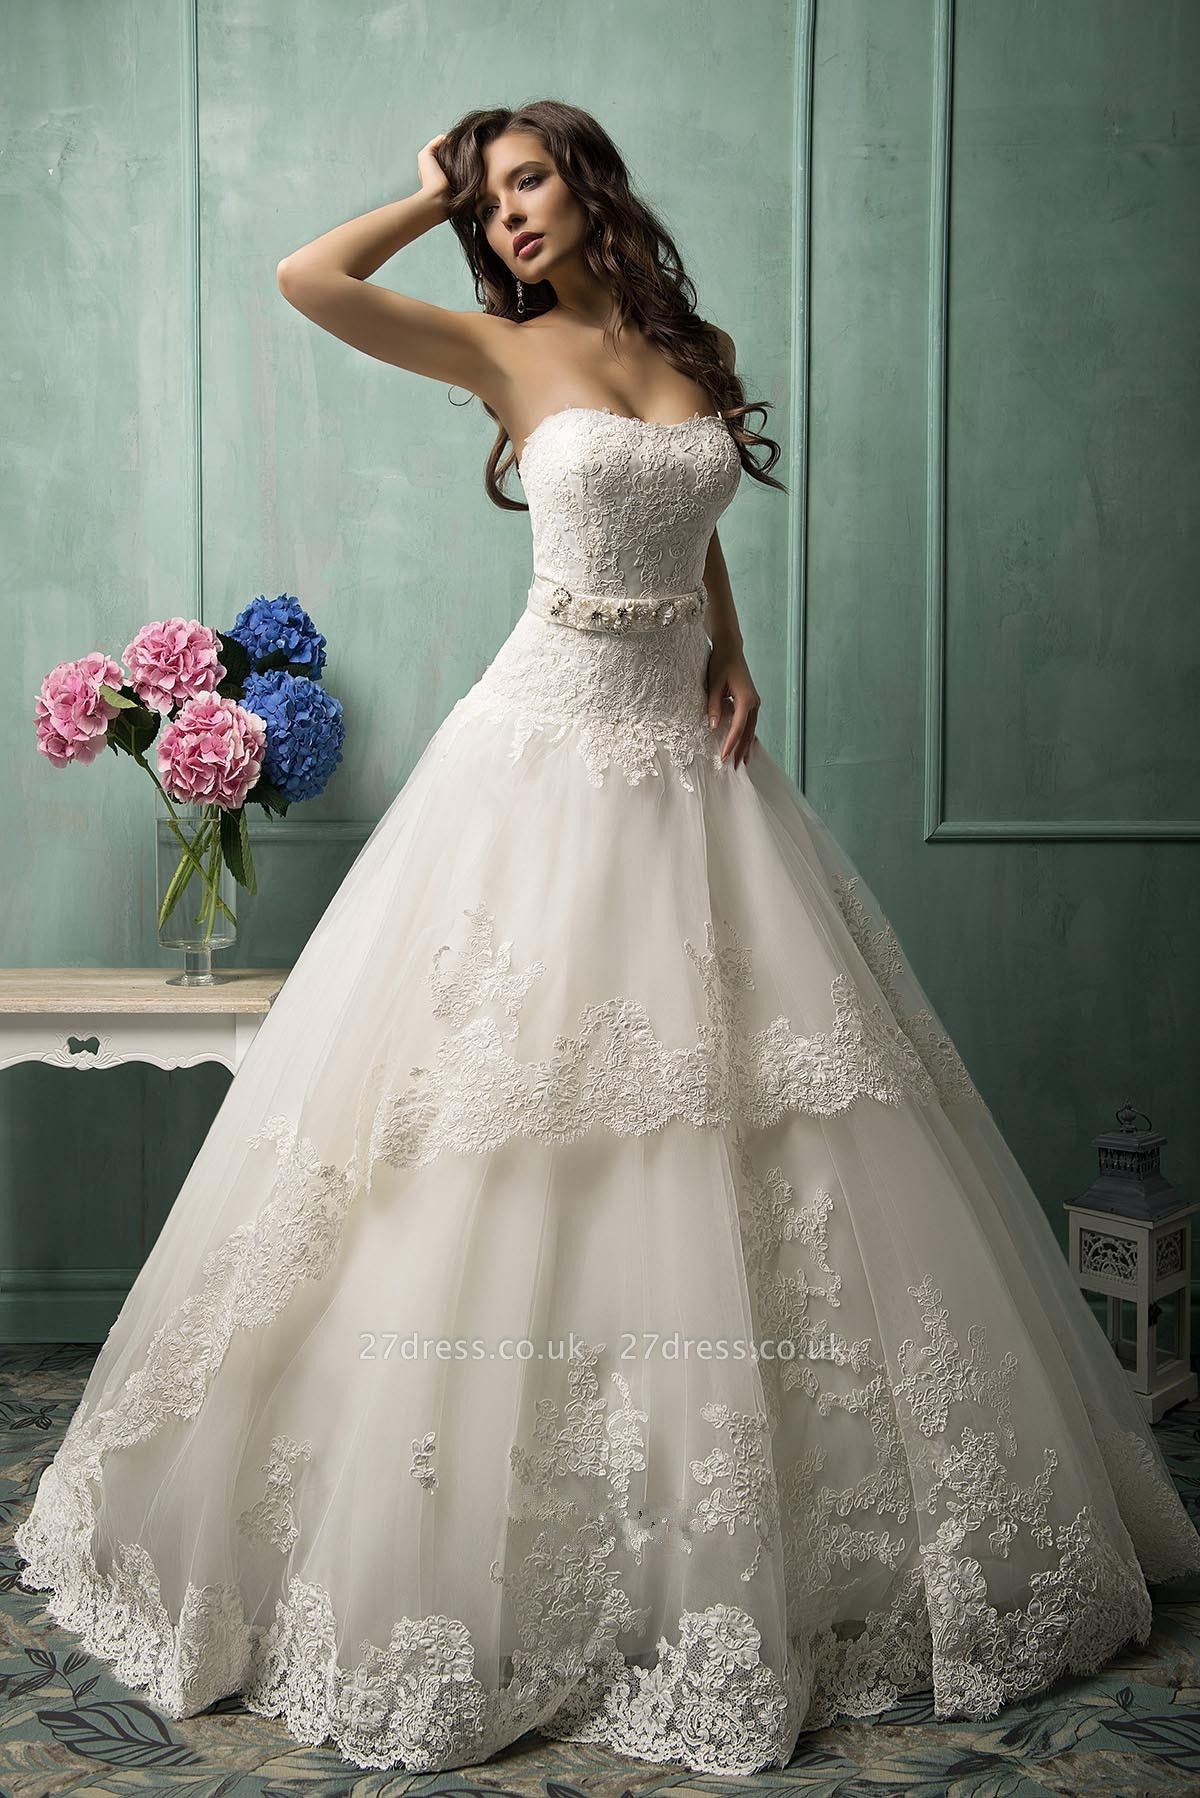 Elegant Sweetheart Sleeveless Tulle Wedding Dress With Lace Appliques Bow